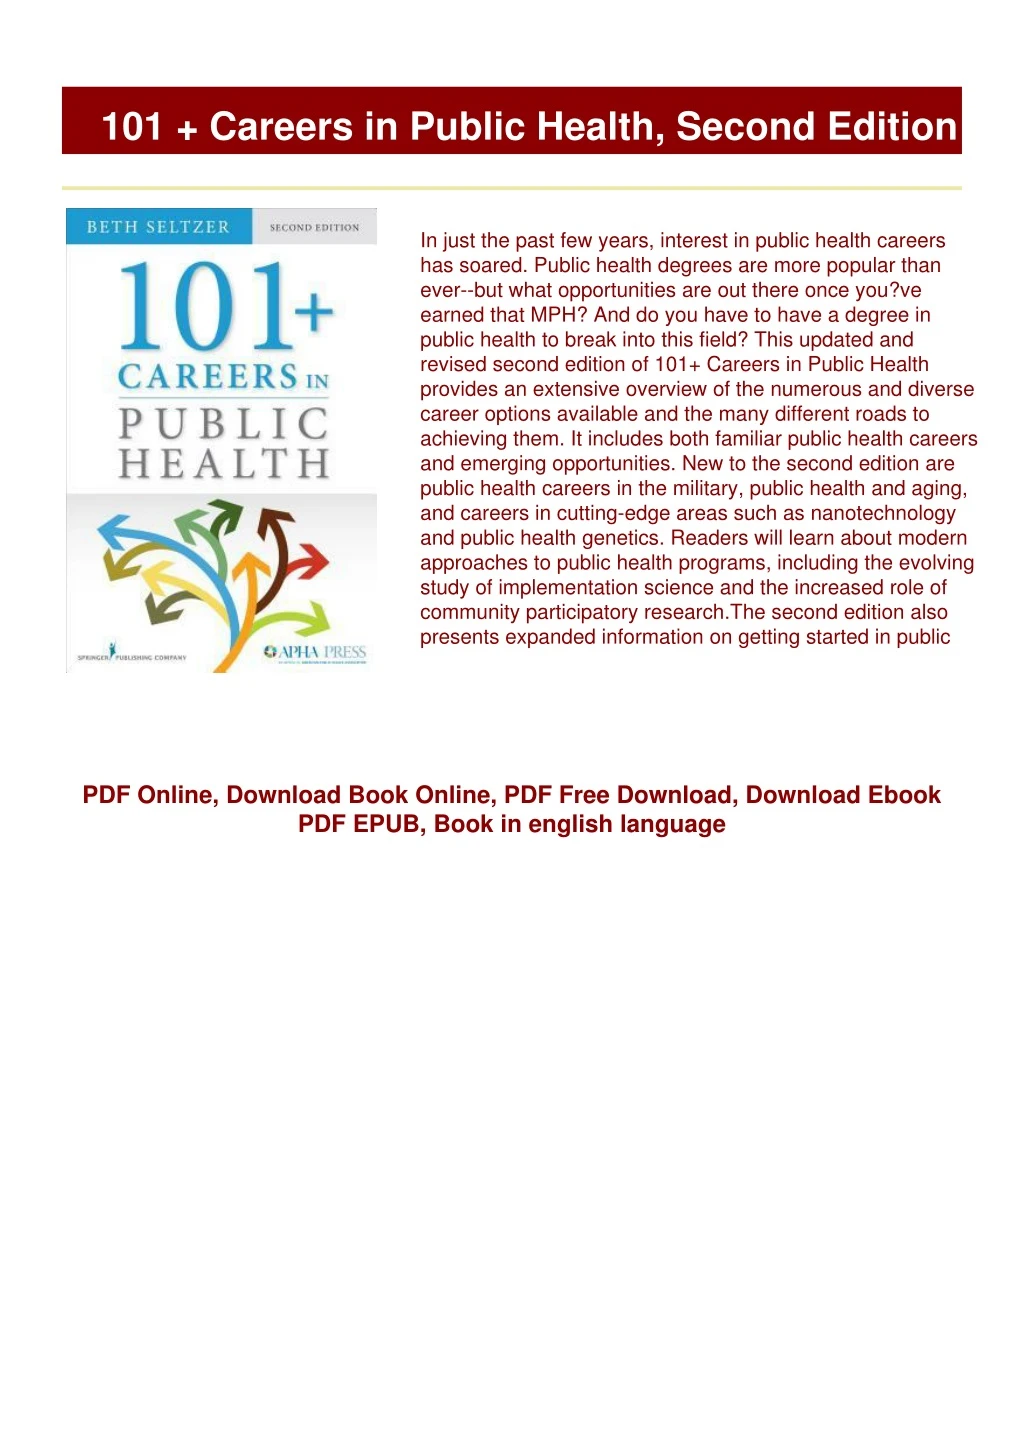 101 careers in public health second edition